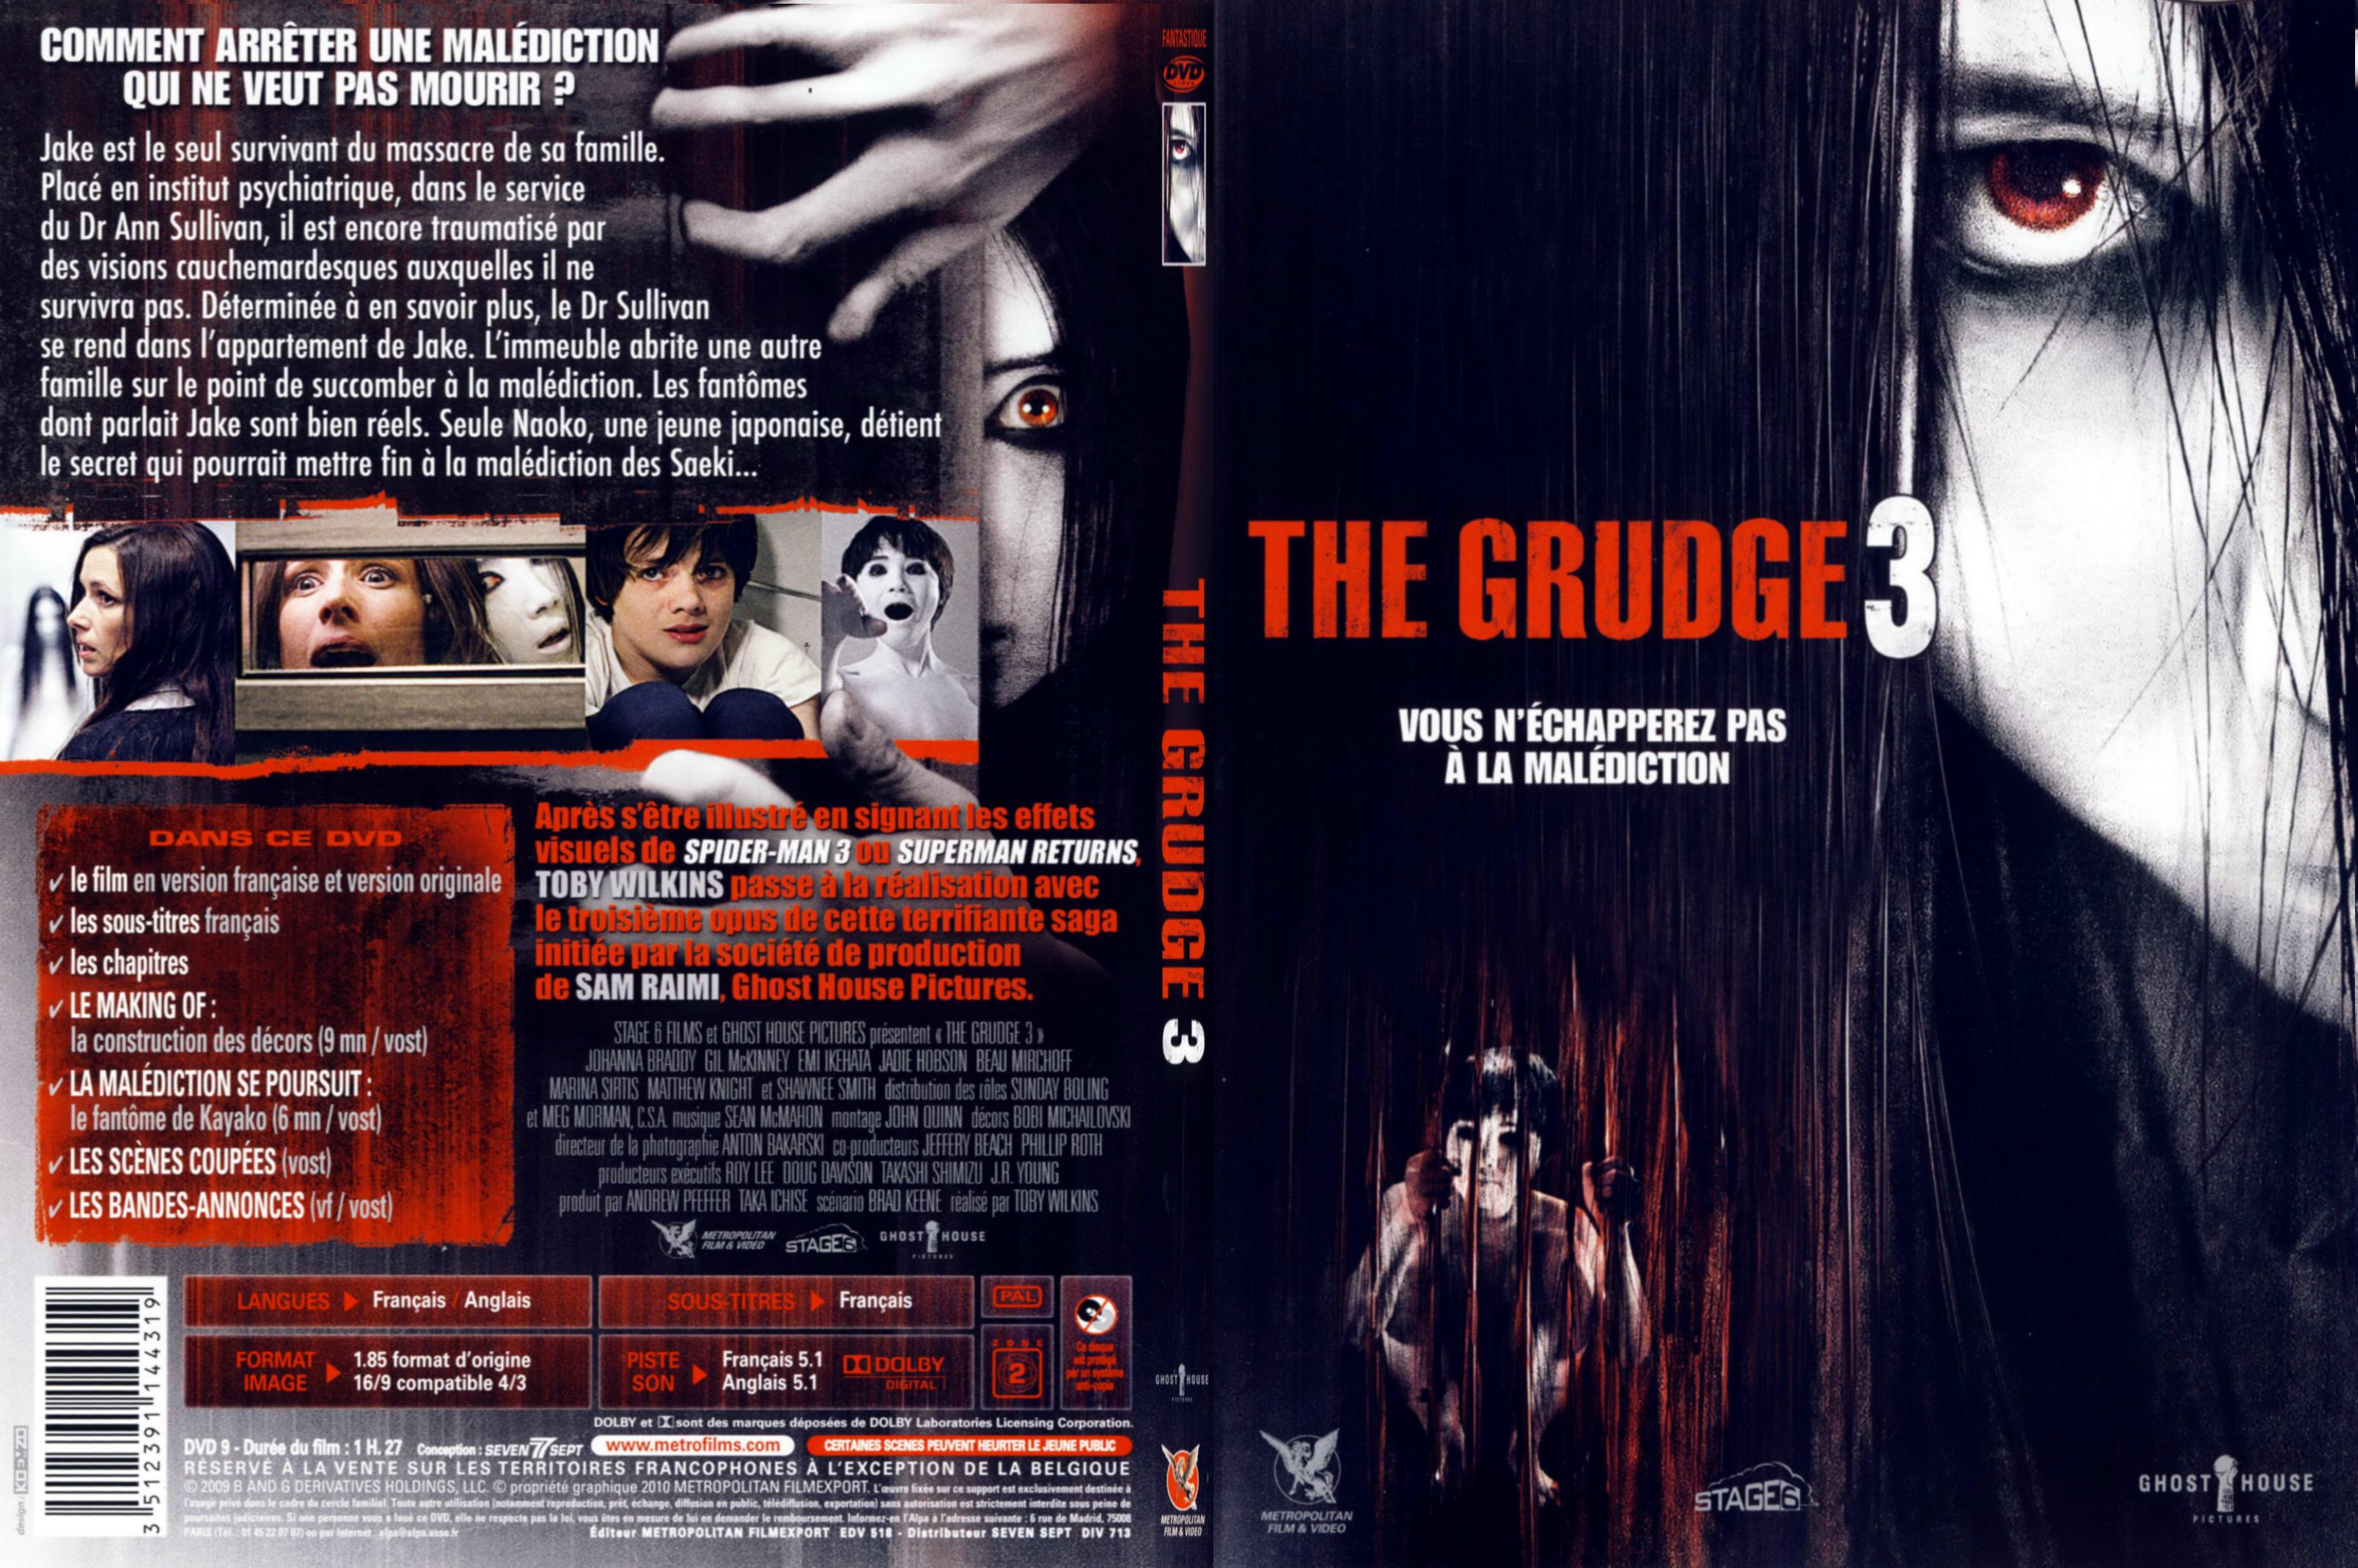 Jaquette DVD The grudge 3 - SLIM